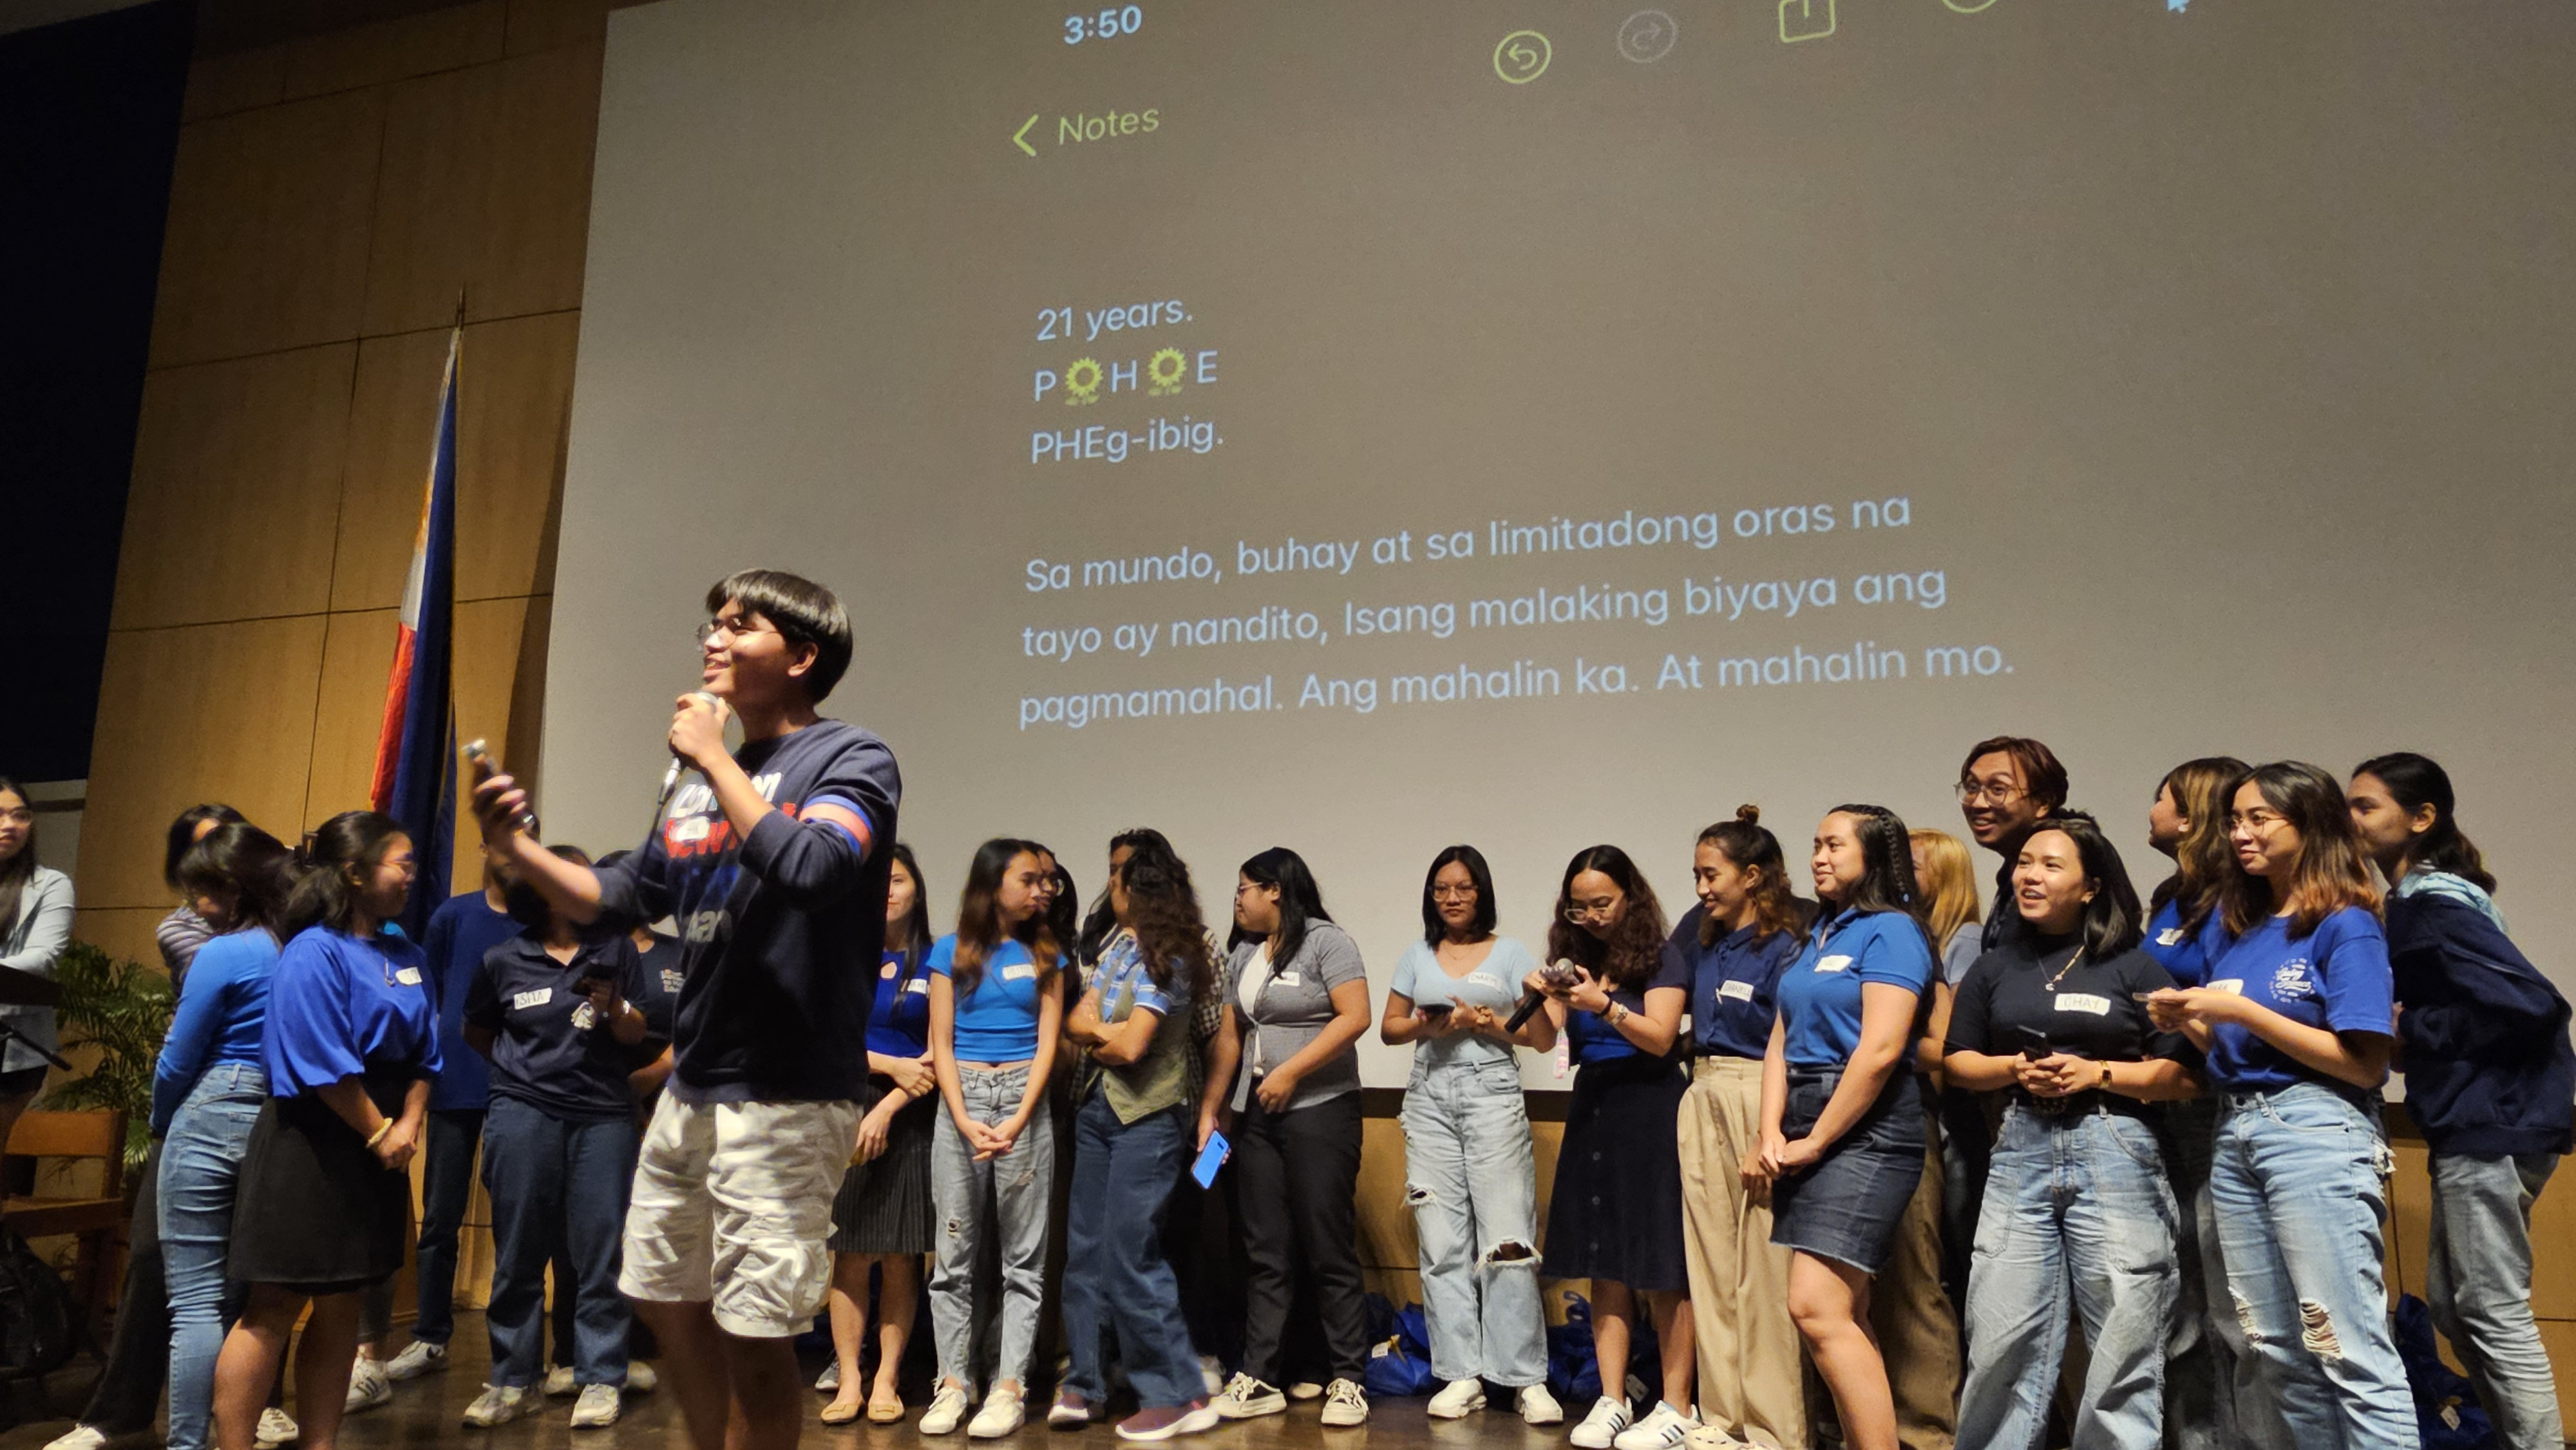 A row of students in blue stand behind one student with a microphone in his hands.